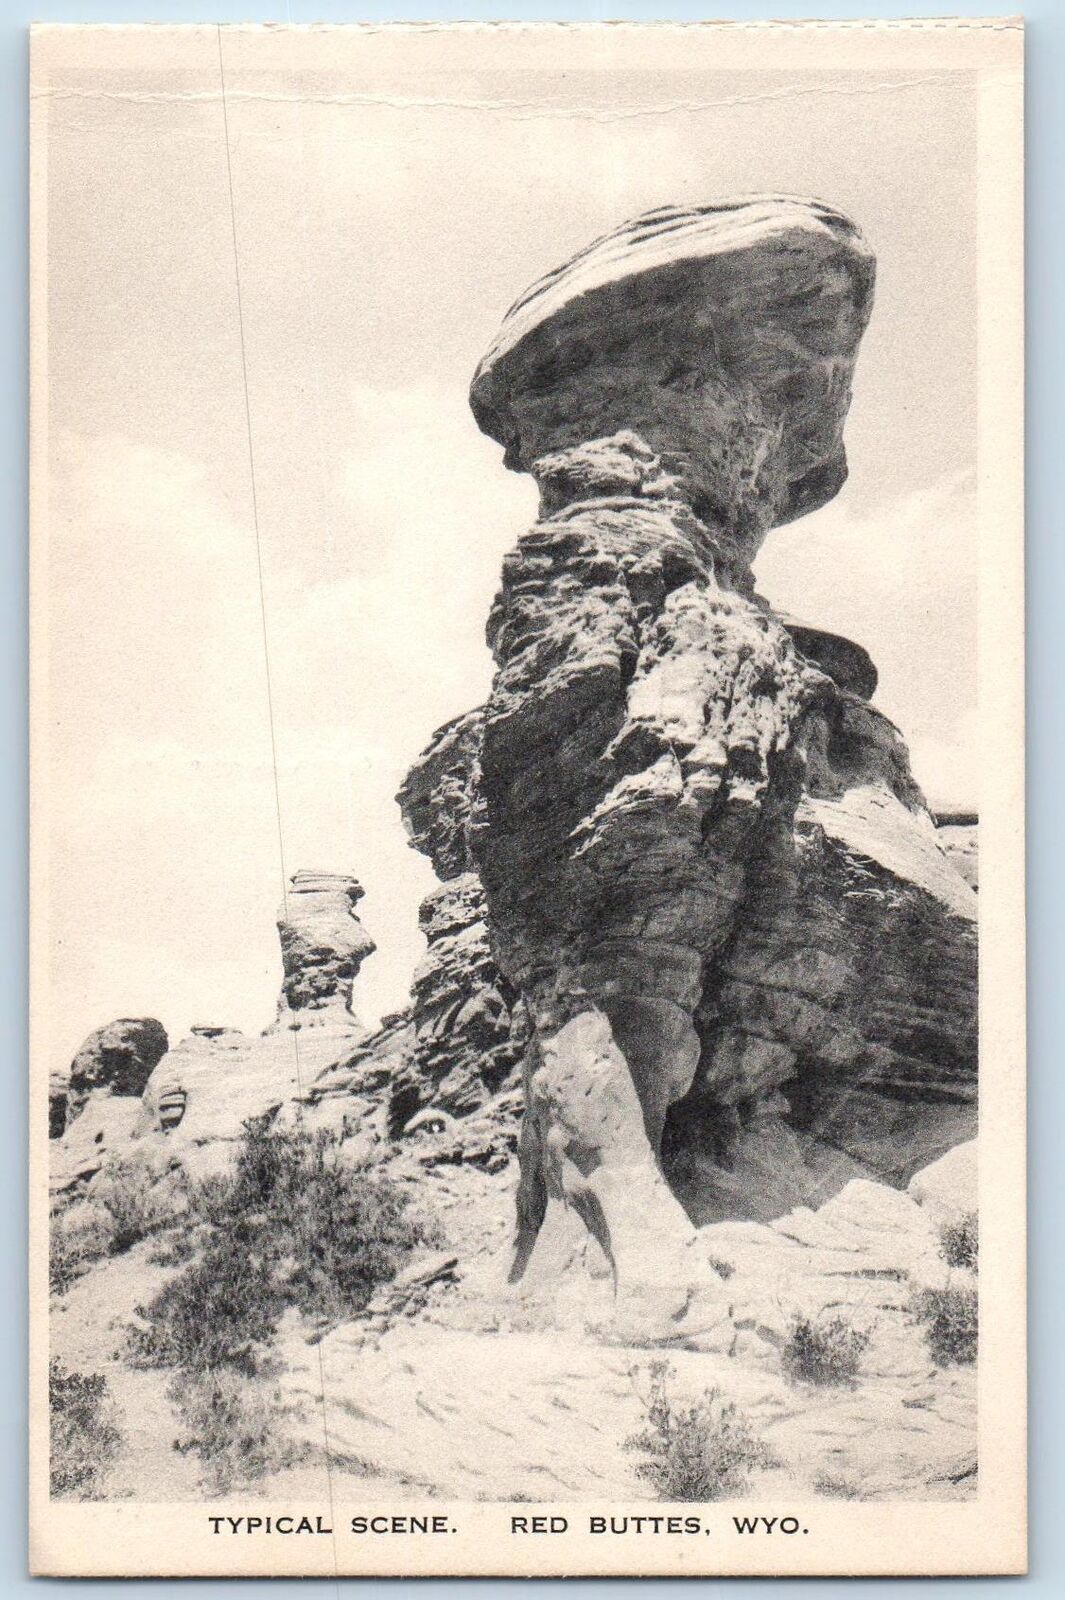 Red Buttes Wyoming Postcard Typical Scene Rock Formations Scene c1940s Vintage